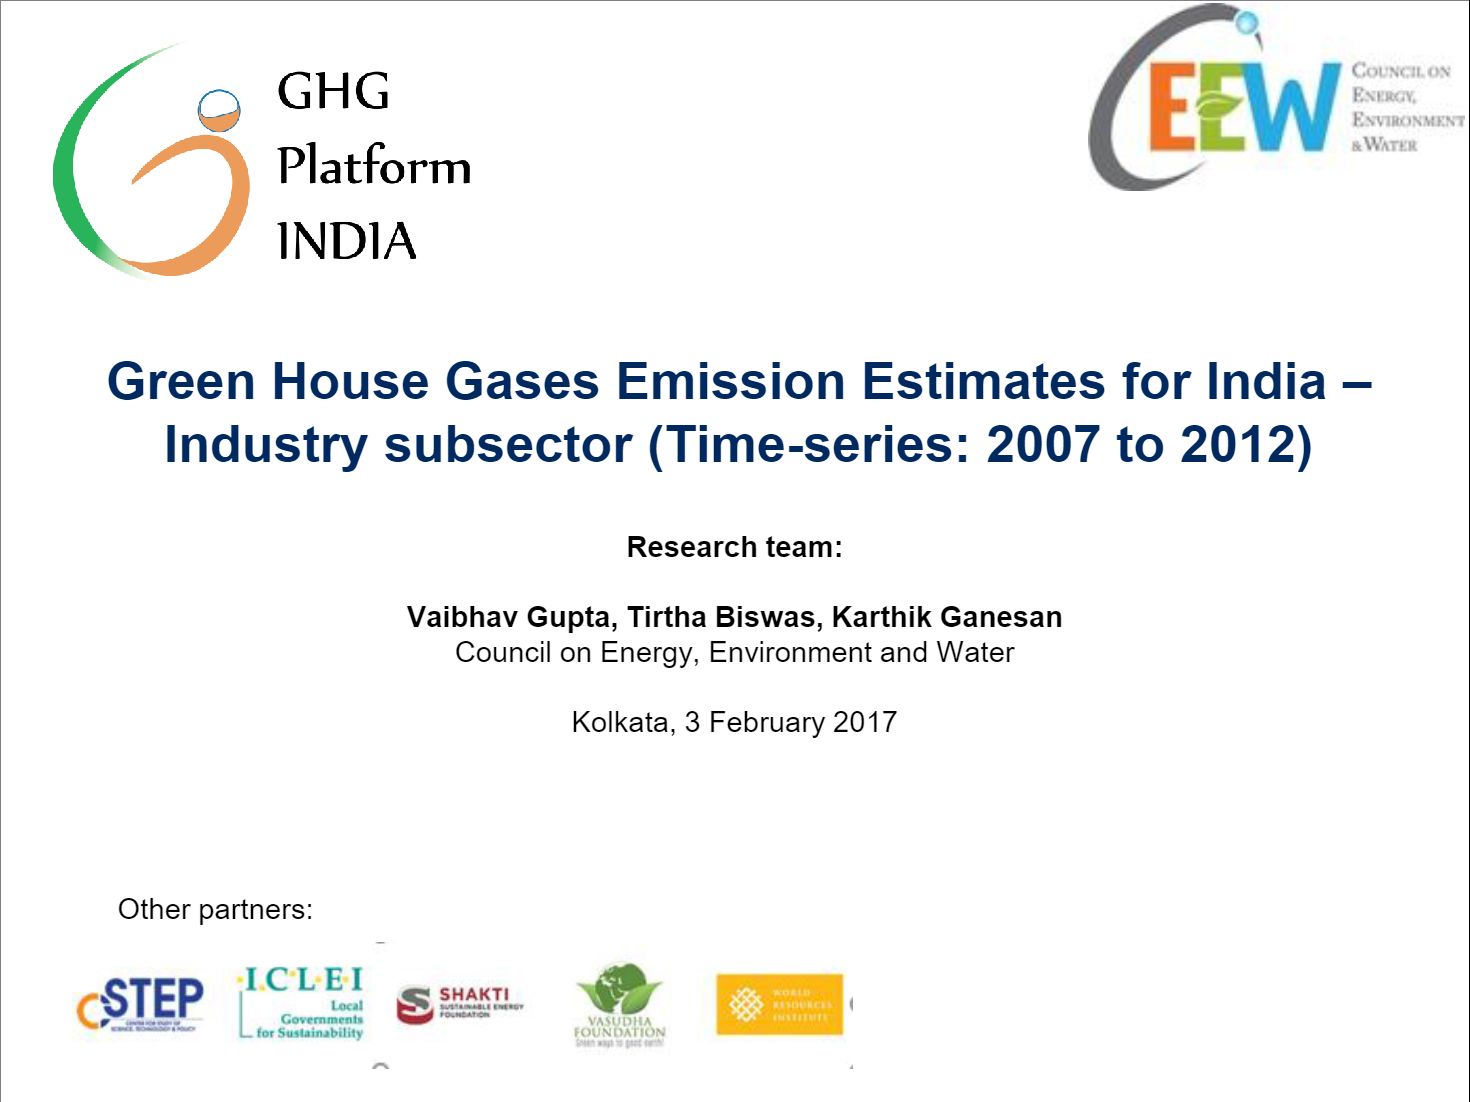 GHGPI-PhaseI-GHG Emission Estimates For India Industry Subsector-Feb17-1